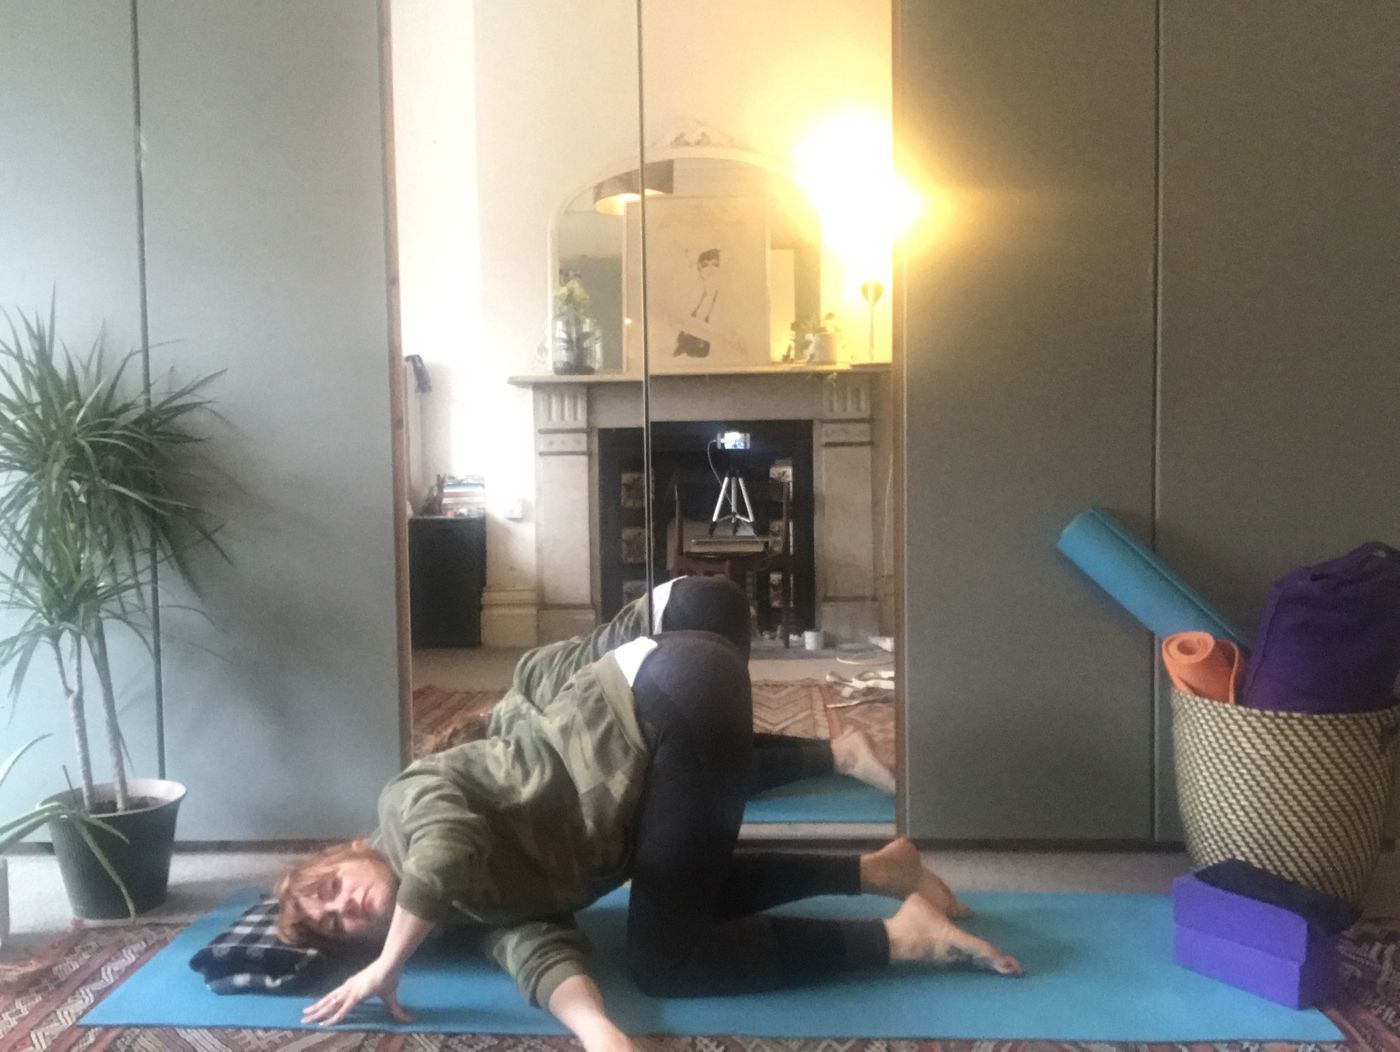 This Friday's Goddess Flow Vinyasa class has some good old fashioned classic asanas that are as familiar and comforting as sticky toffee pudding, no stress just movement. 
https://bua.fit/class/ZOuN7ukEXDxM